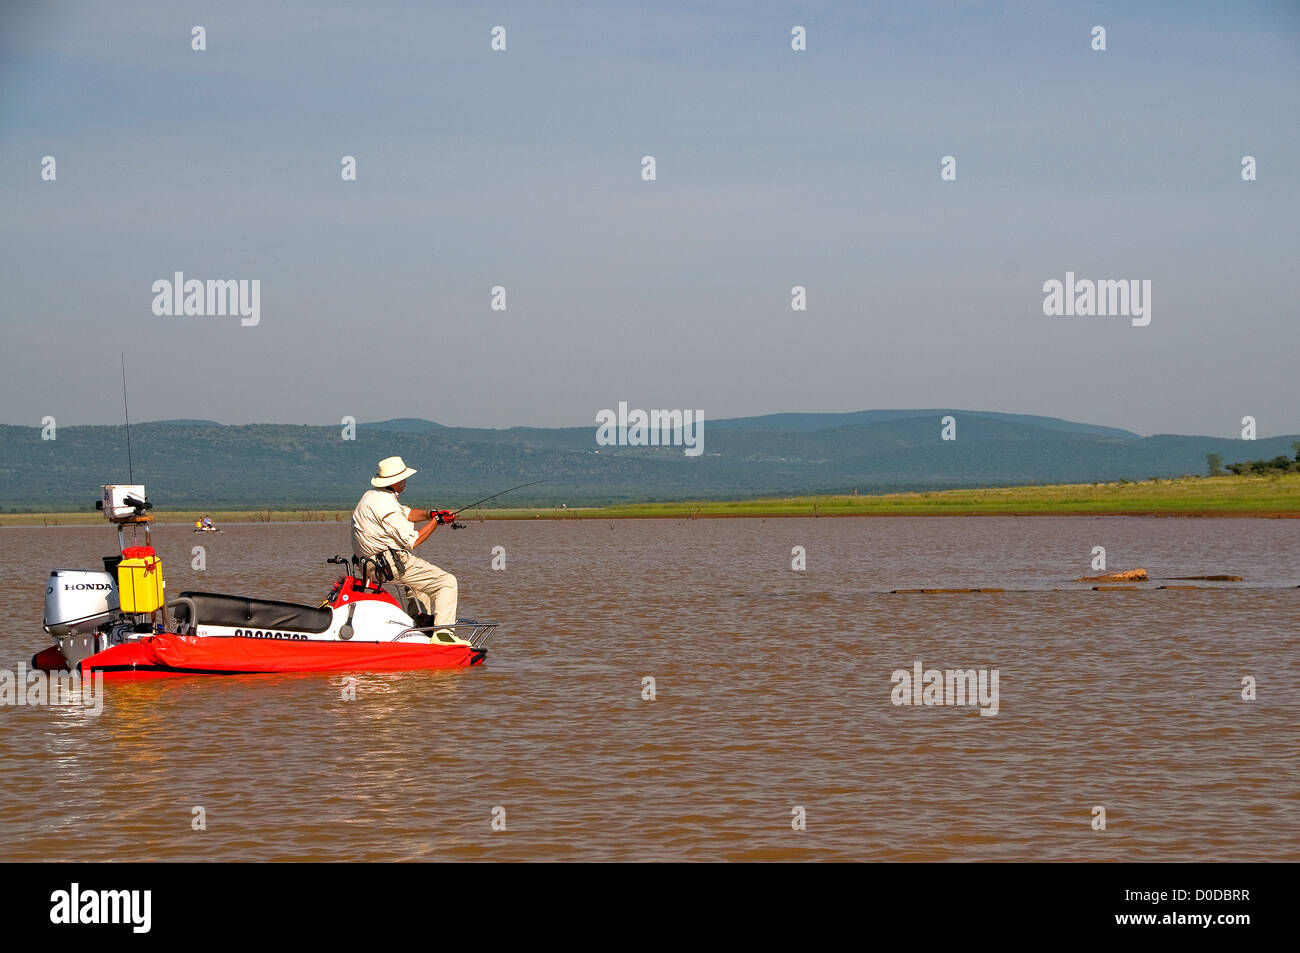 An angler on an AquaQuad boat casts for tiger fish in pretty Lake Jozini on Phongolo GR, KwaZulu Natal, South Africa. Stock Photo